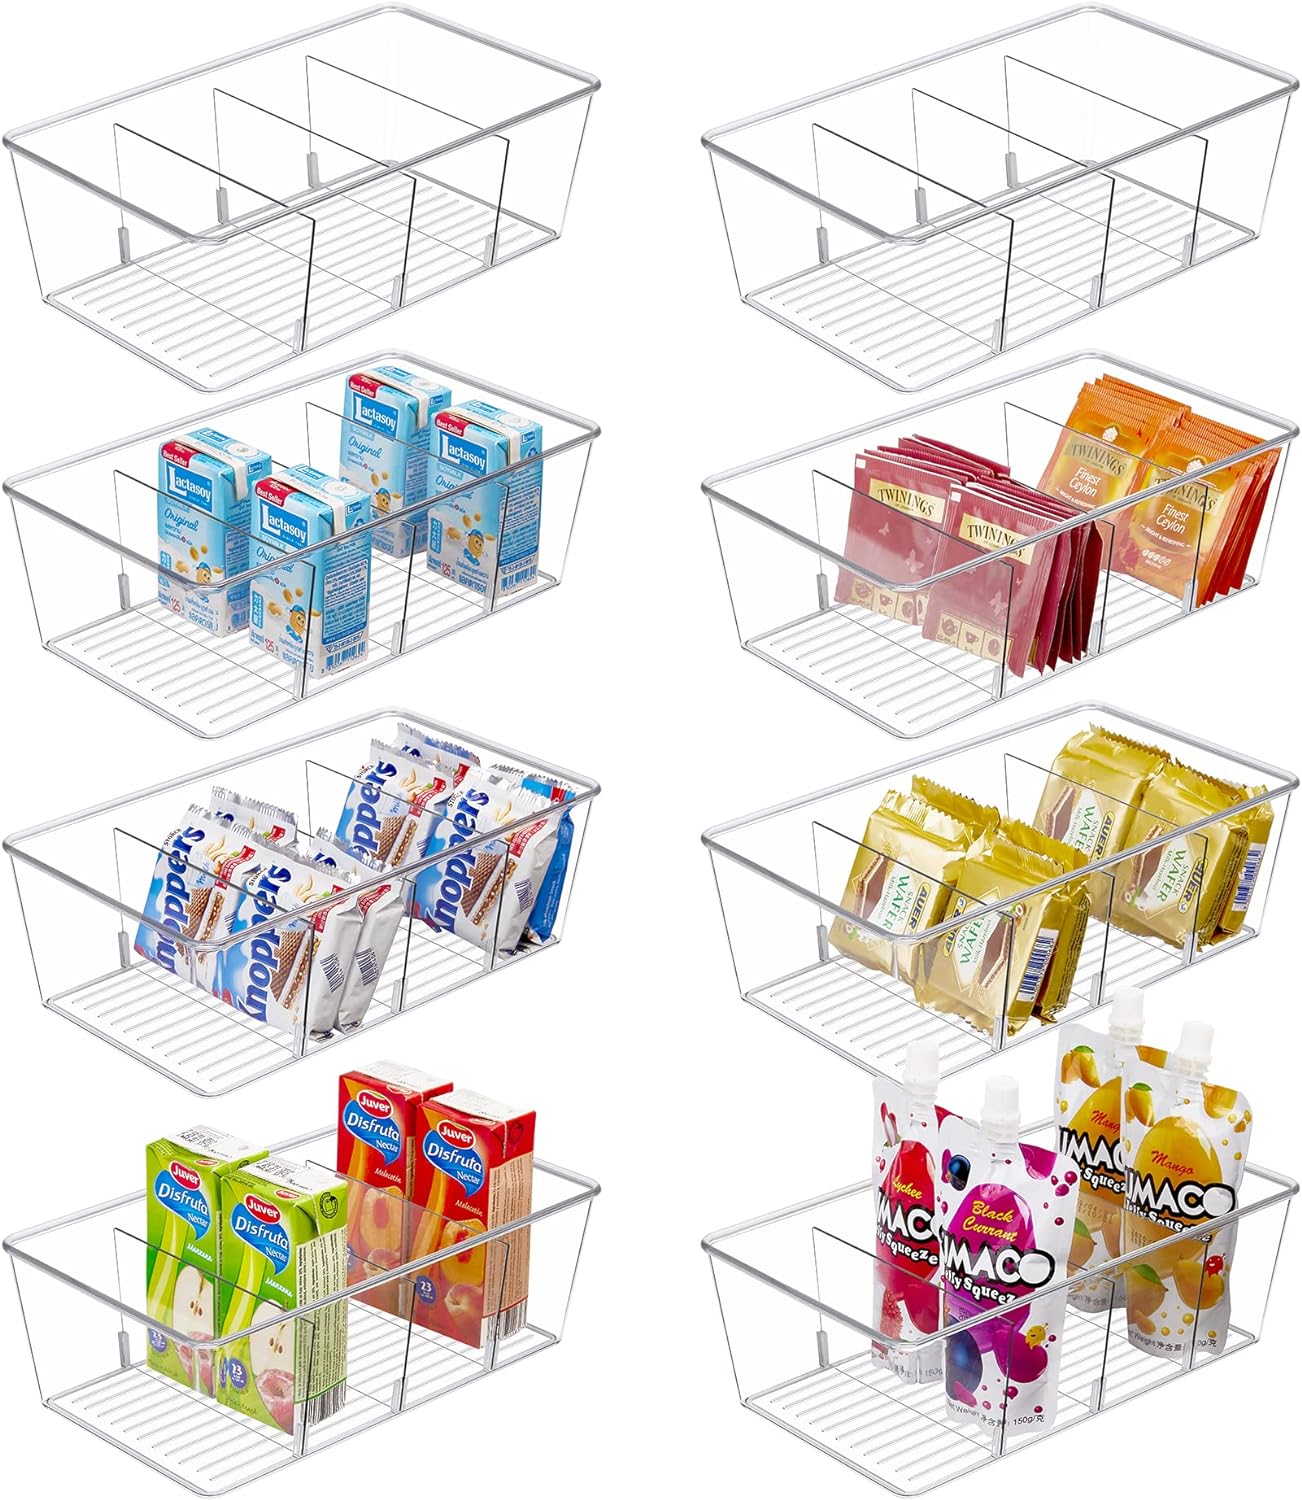 8 Pack Food Storage Organizer Bins, Clear Plastic Bins for Pantry, Kitchen,  Fridge, Cabinet Organization and Storage, 4 Compartment Holder for Packets,  Snacks, Pouches, Spice Packets